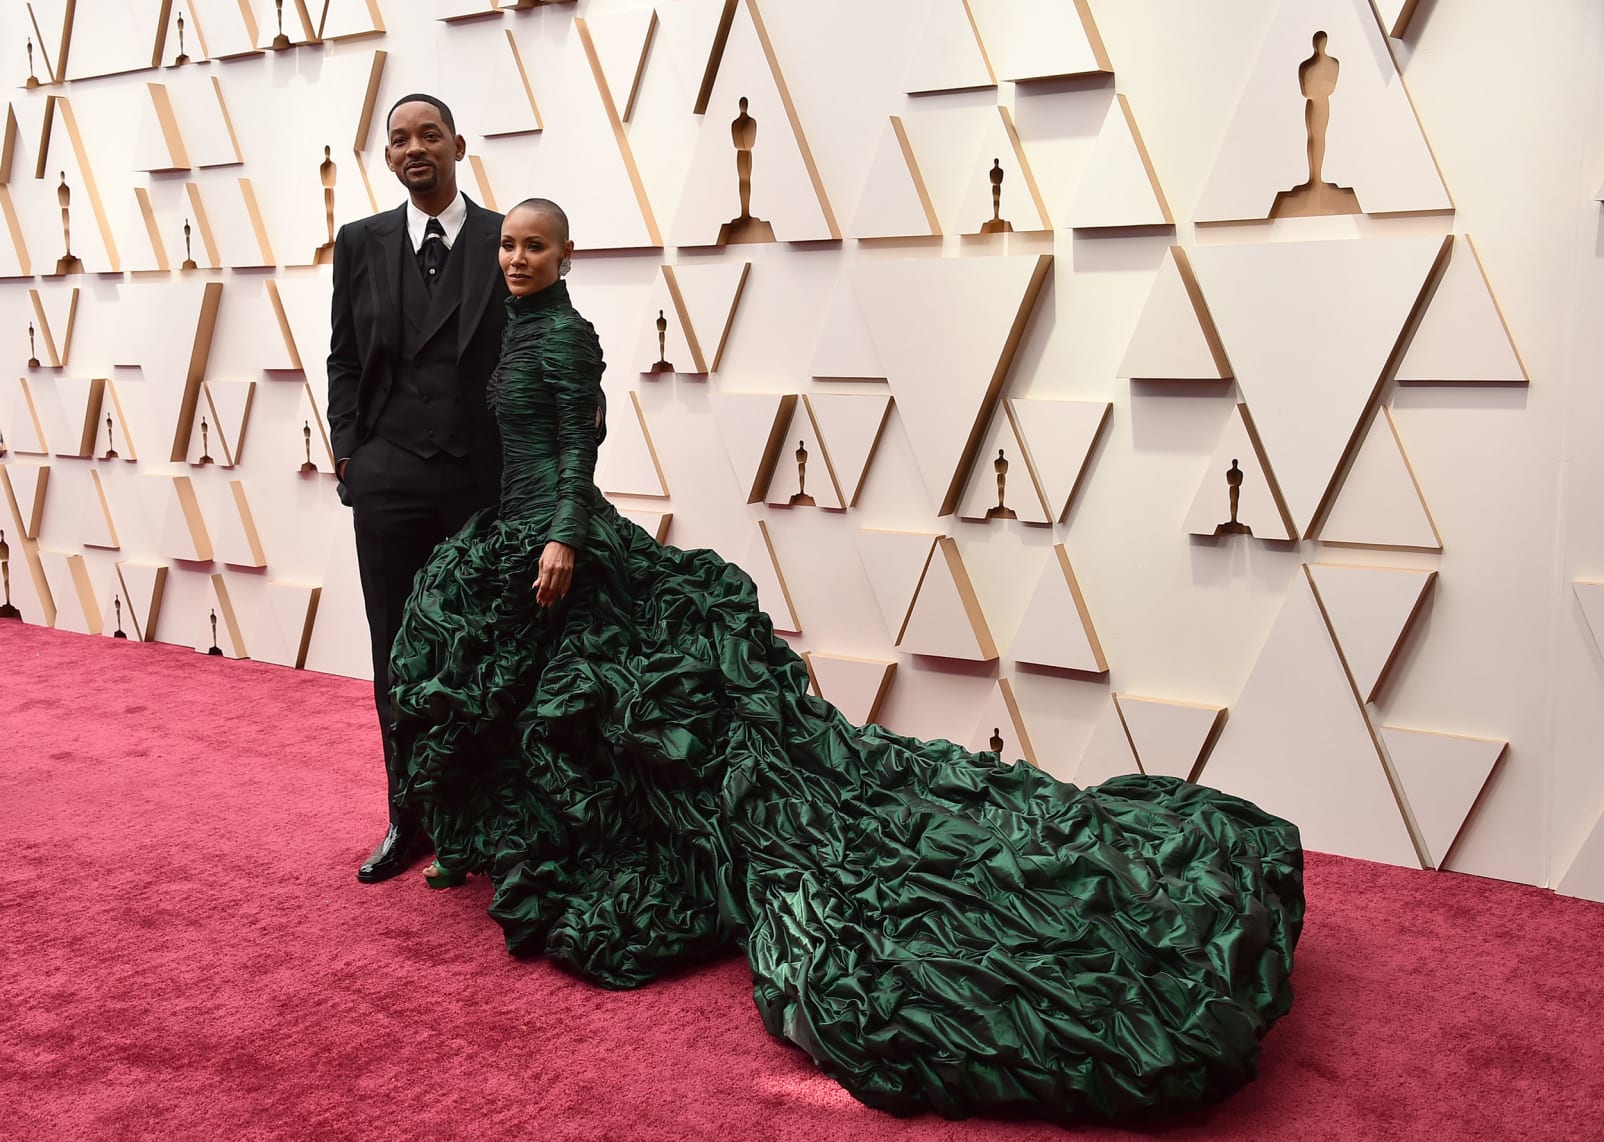 Will Smith, who won Best Actor for his role as Richard Williams in "King Richard," arrived on the carpet wearing Dolce & Gabbana, accompanied with Jada Pinkett Smith in a voluminous emerald green gown by Jean Paul Gaultier.